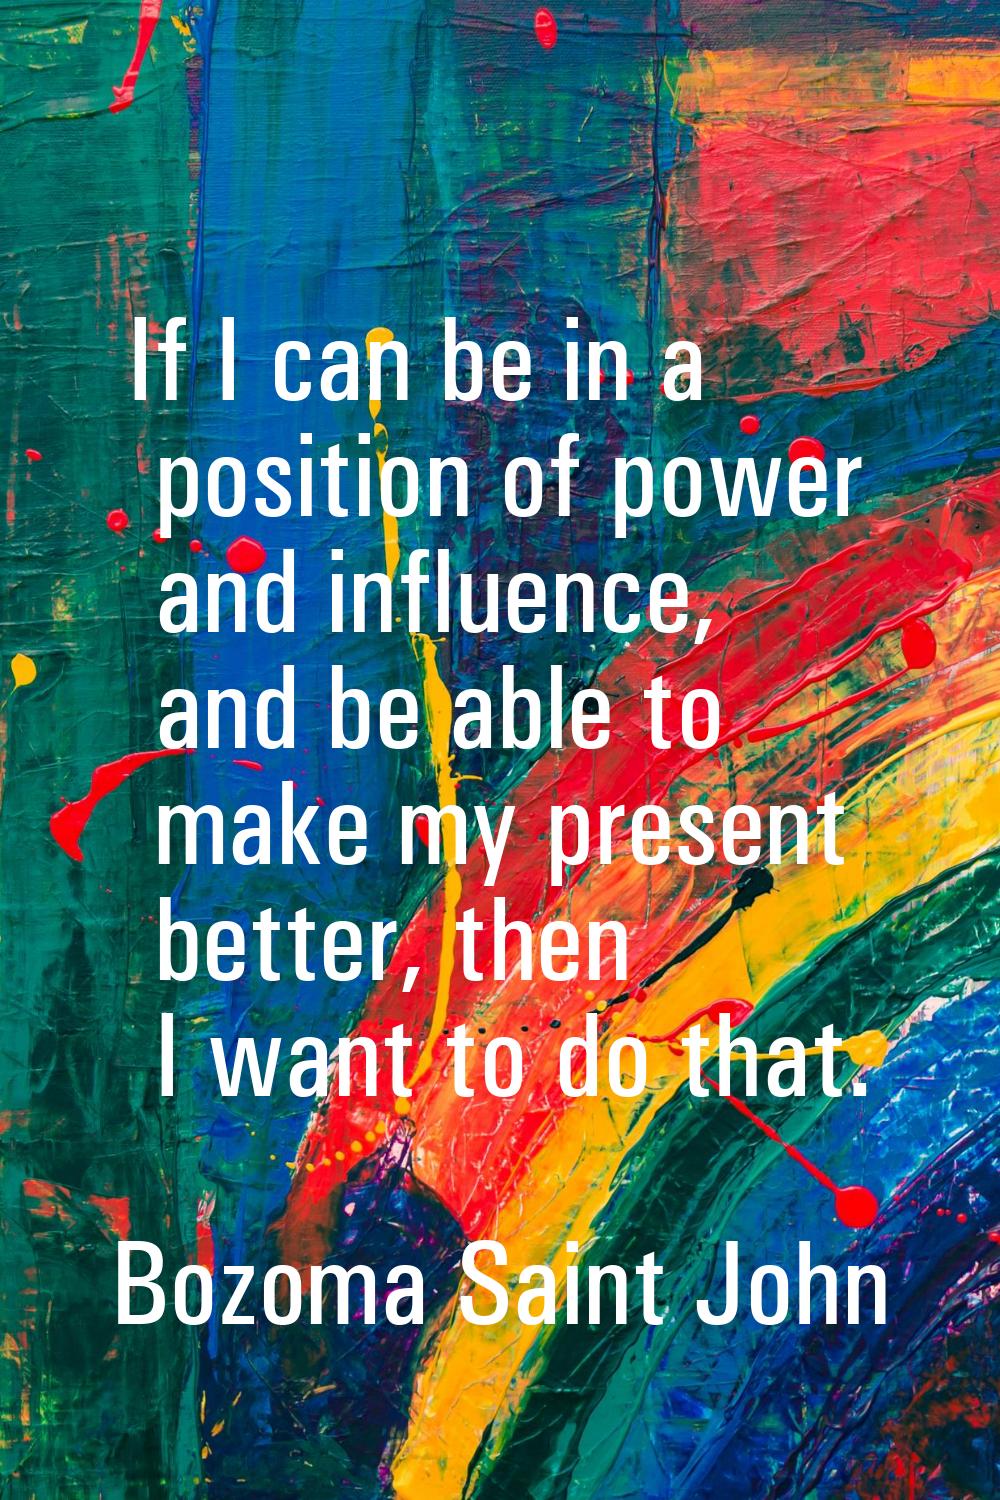 If I can be in a position of power and influence, and be able to make my present better, then I wan